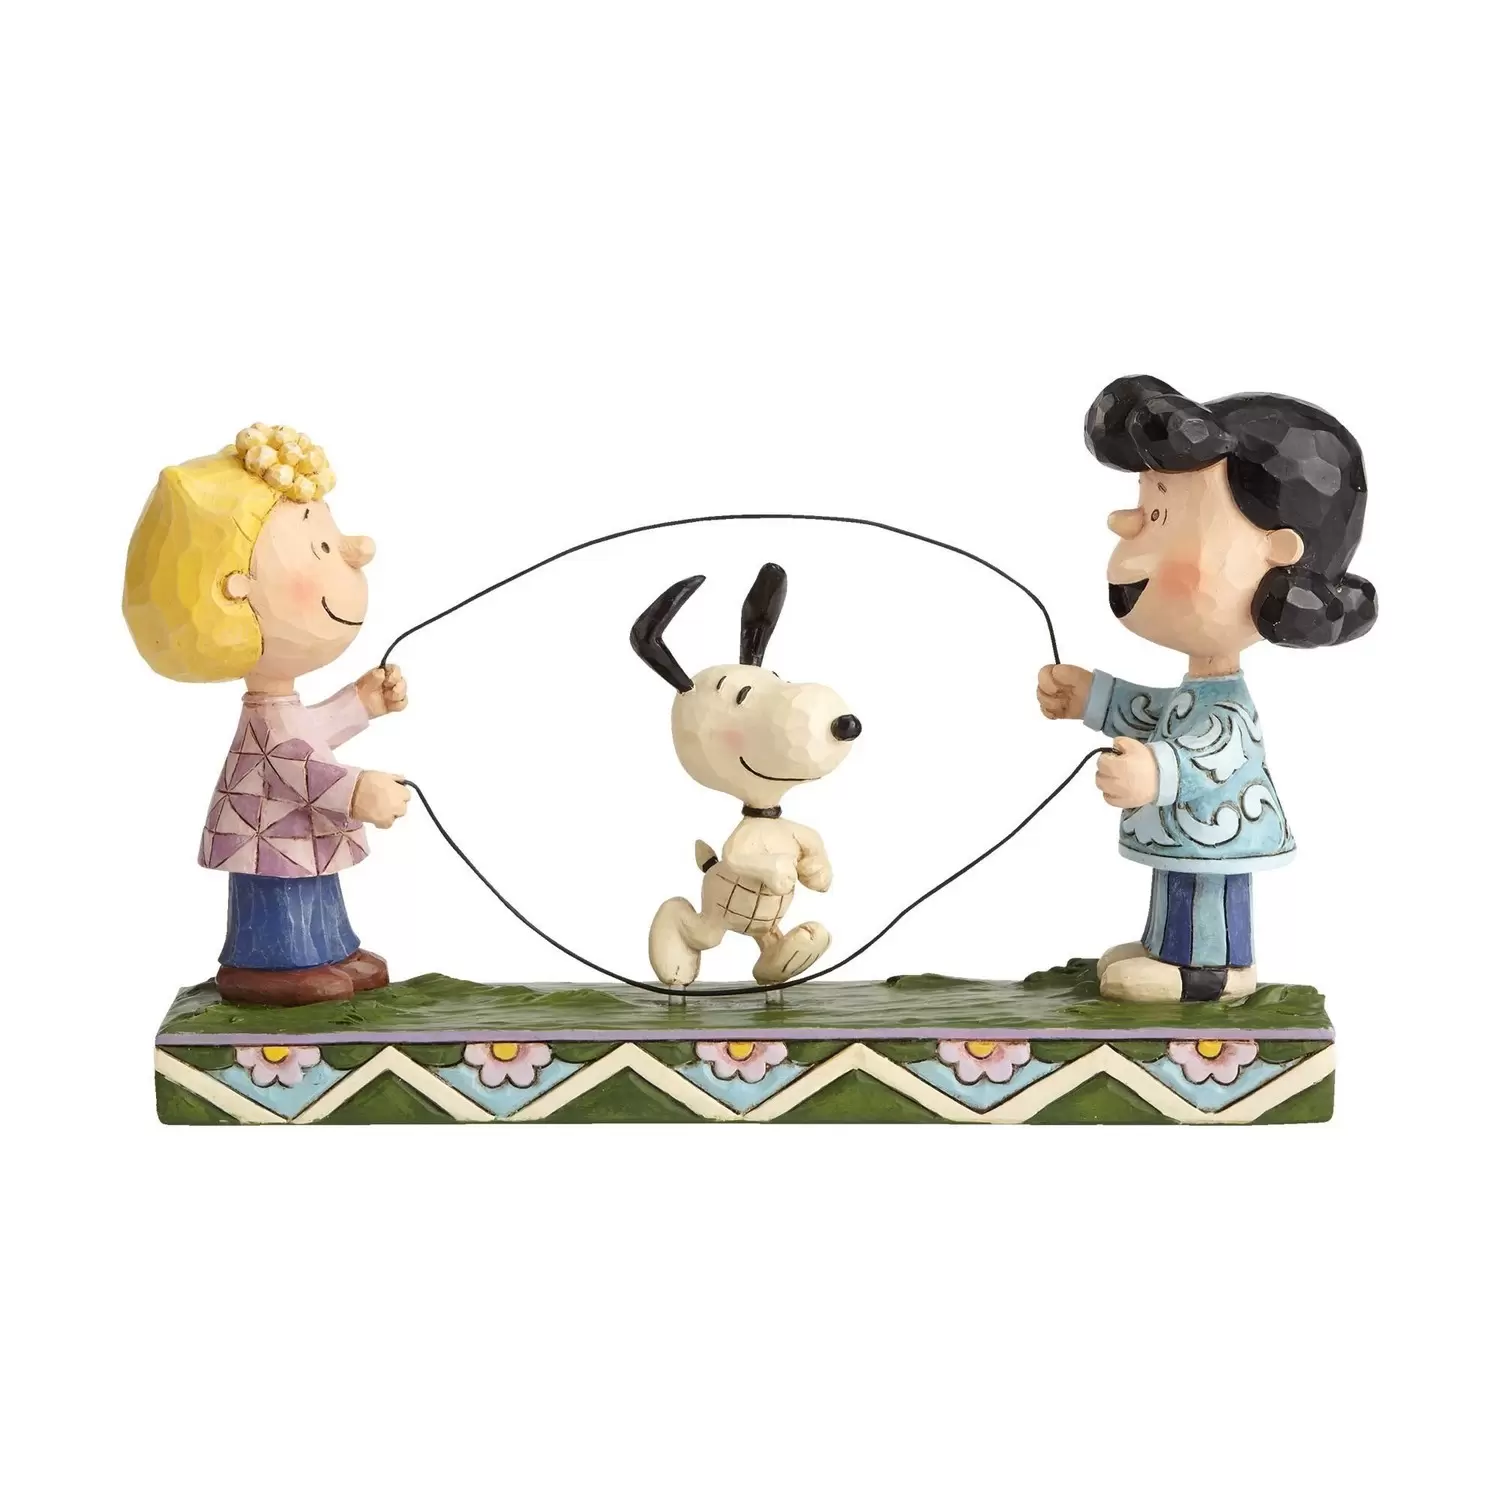 Peanuts - Jim Shore - Double Dutch Dog - Sally, Lucy, & Snoopy Jumping Rope